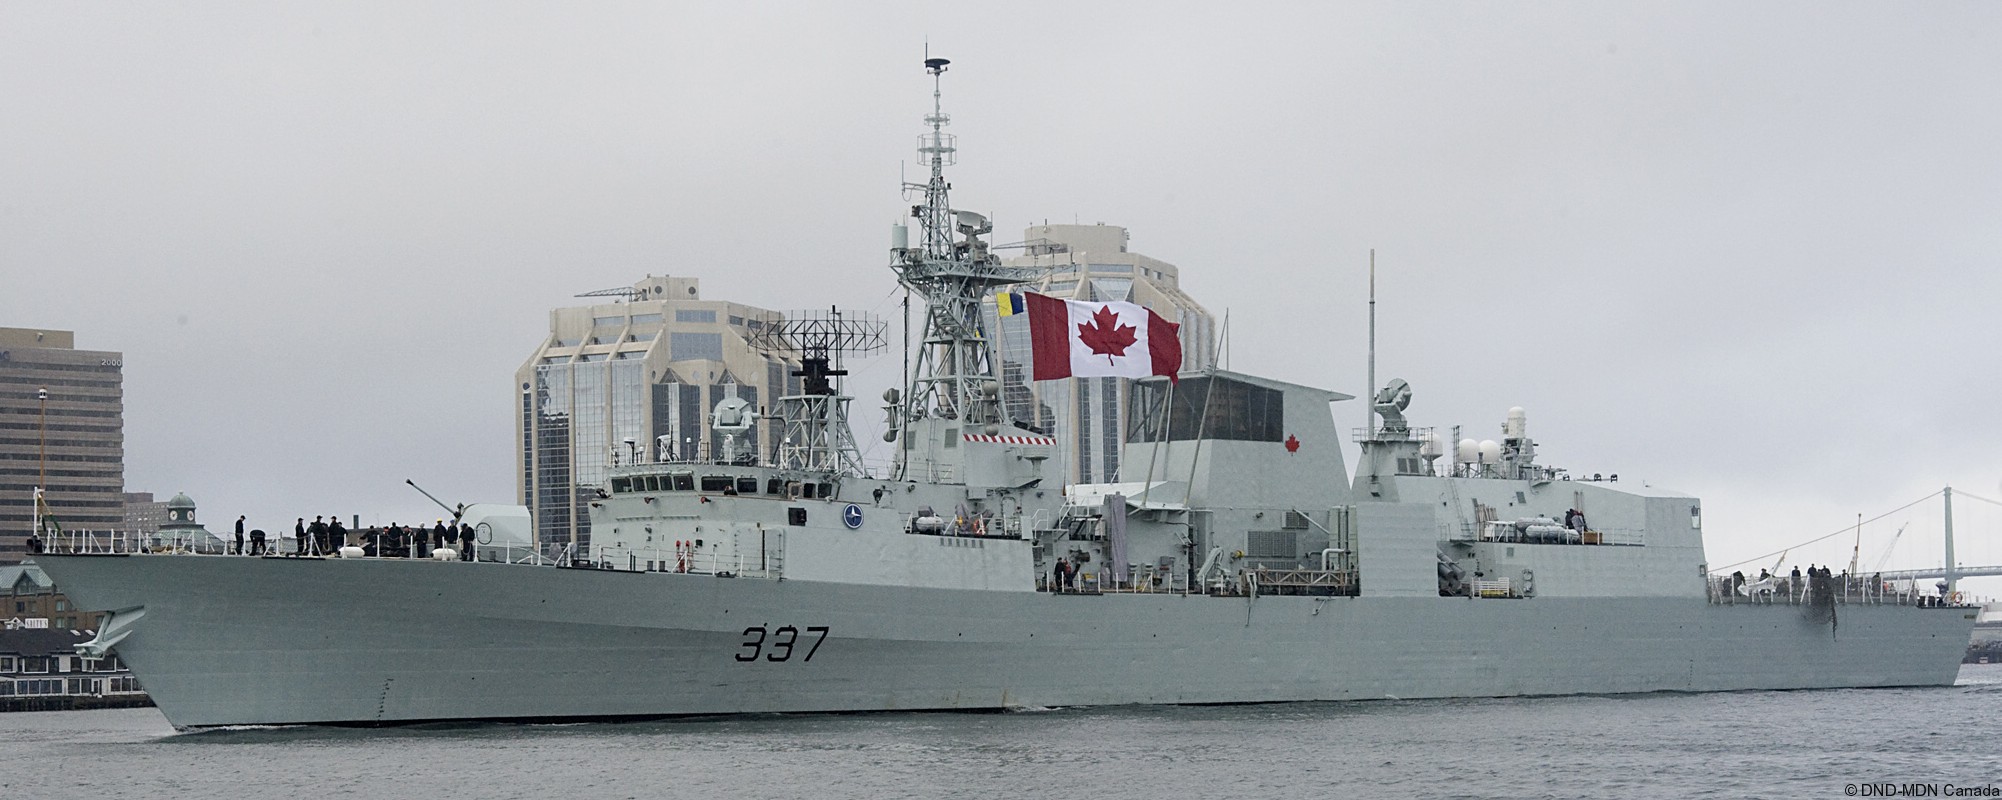 ffh-337 hmcs fredericton halifax class helicopter patrol frigate ncsm royal canadian navy 36